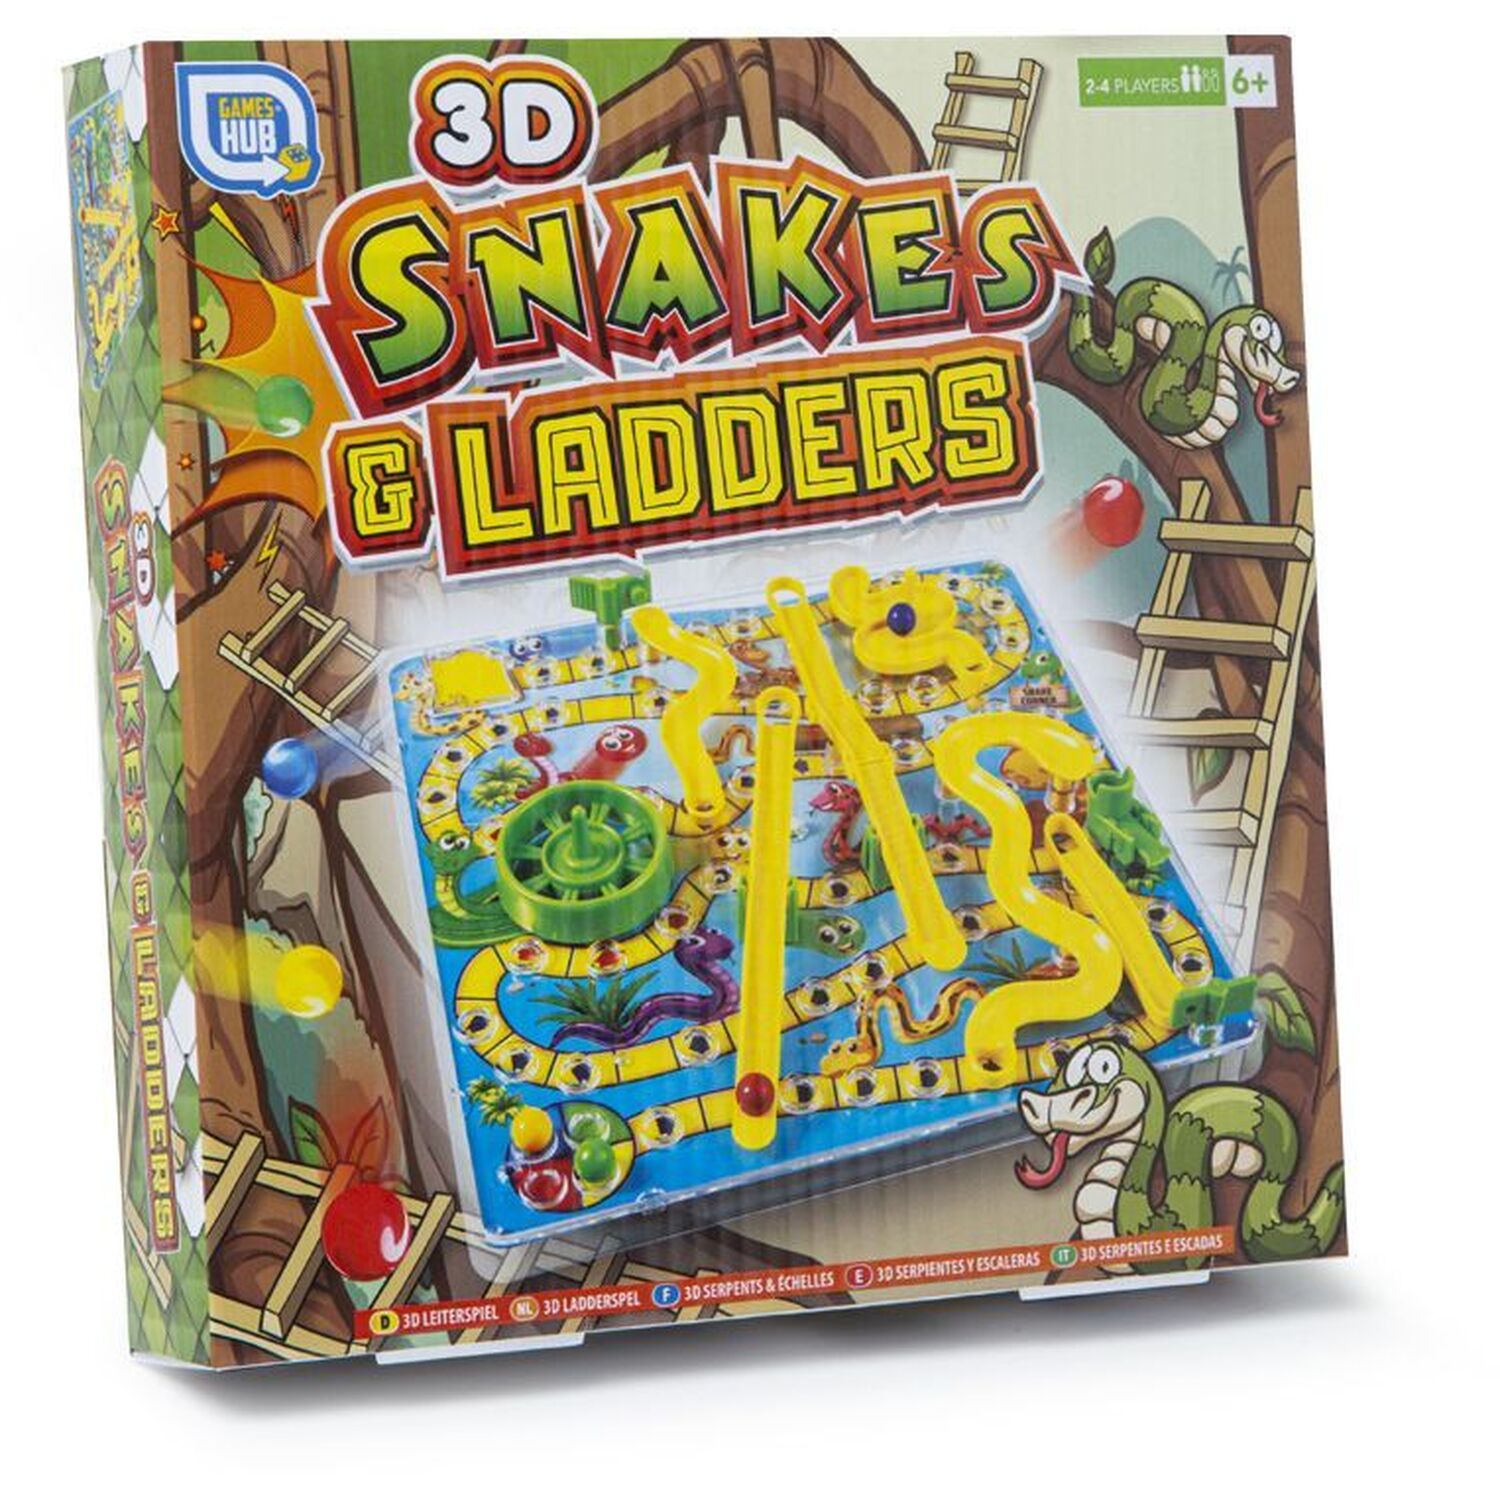 Travel Size 3D Snakes & Ladders Image